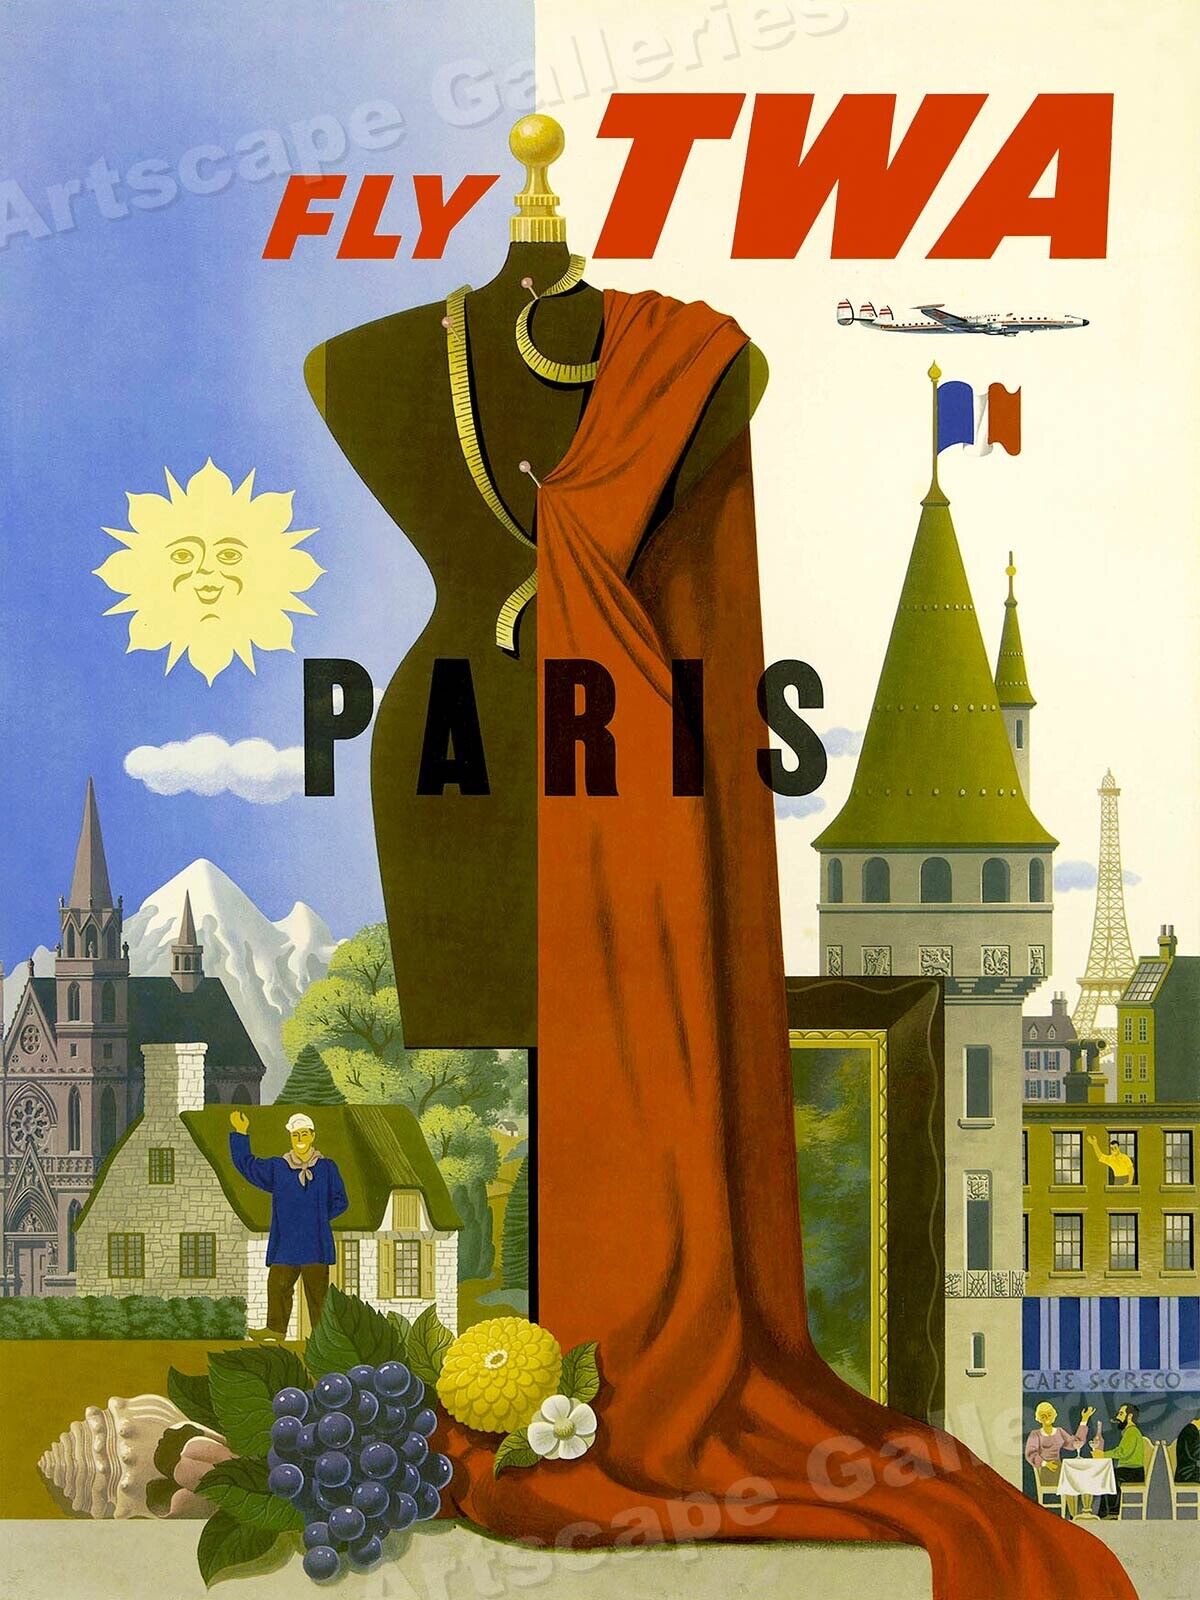 Fly to Paris on TWA 1950s Vintage Style Travel Poster - 18x24